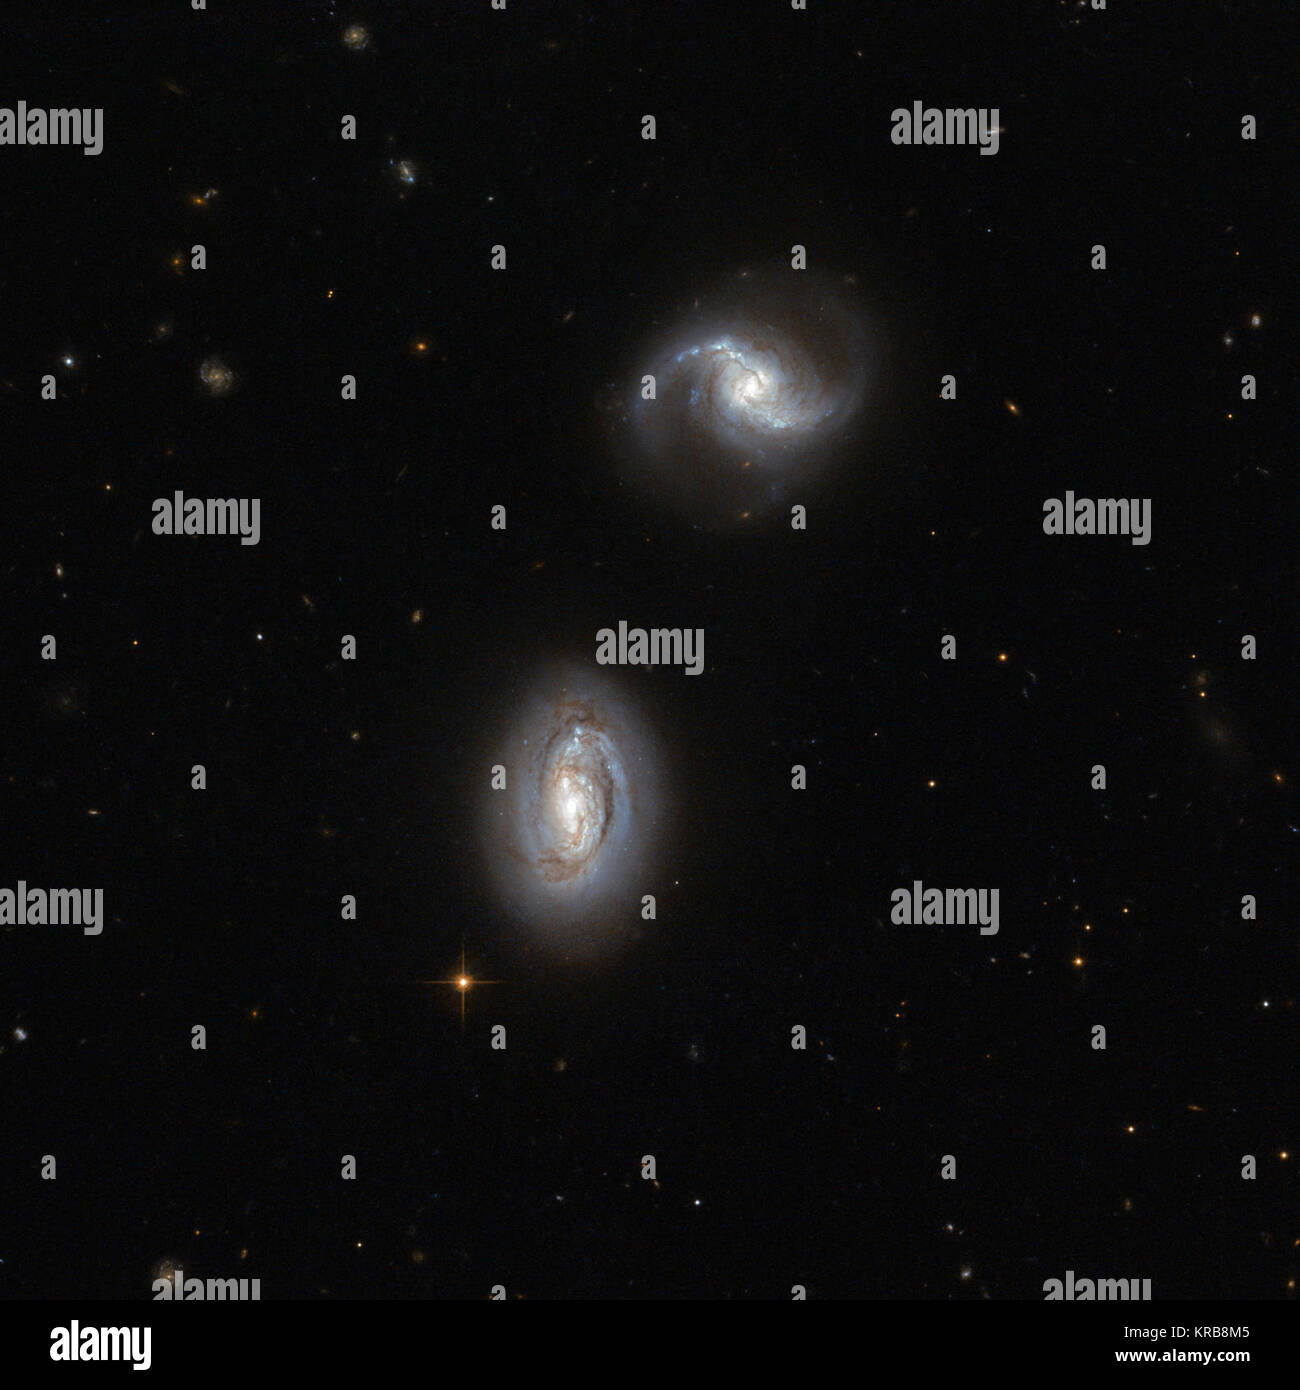 Looking  towards the constellation of Triangulum (The Triangle), in the northern  sky, lies the galaxy pair MRK 1034. The two very similar galaxies,  named PGC 9074 and PGC 9071, are close enough to one another to be bound  together by gravity, although no gravitational disturbance can yet be  seen in the image. These objects are probably only just beginning to  interact gravitationally. Both  are spiral galaxies, and are presented to our eyes face-on, so we are  able to appreciate their distinctive shapes. On the left of the image,  spiral galaxy PGC 9074 shows a bright bulge and two spiral a Stock Photo